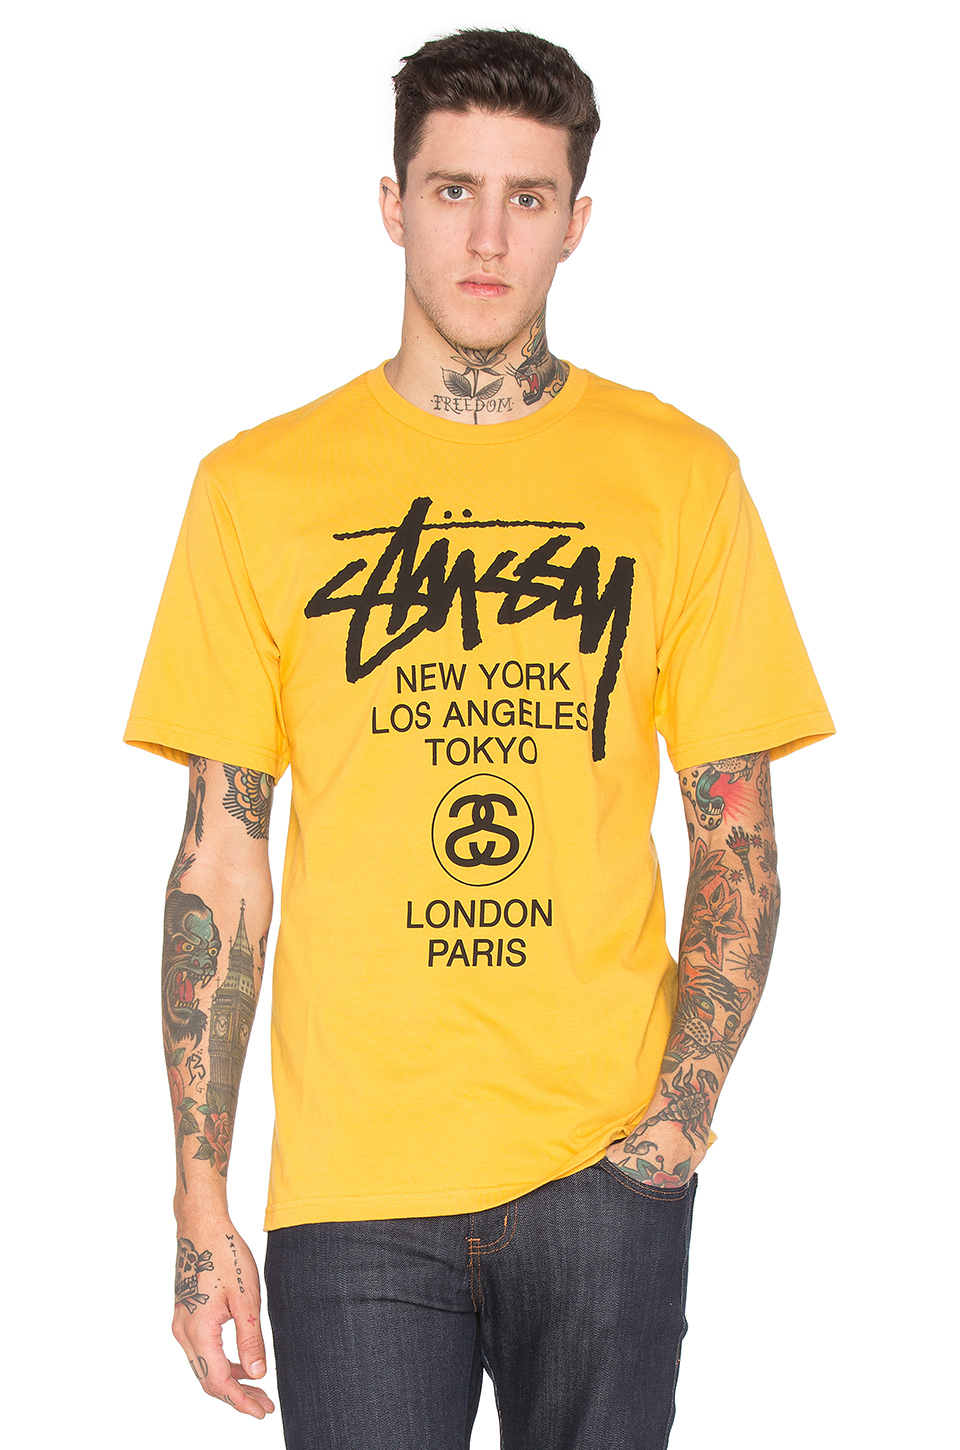 Lyst - Stussy Logo-Print Cotton T-Shirt in Yellow for Men